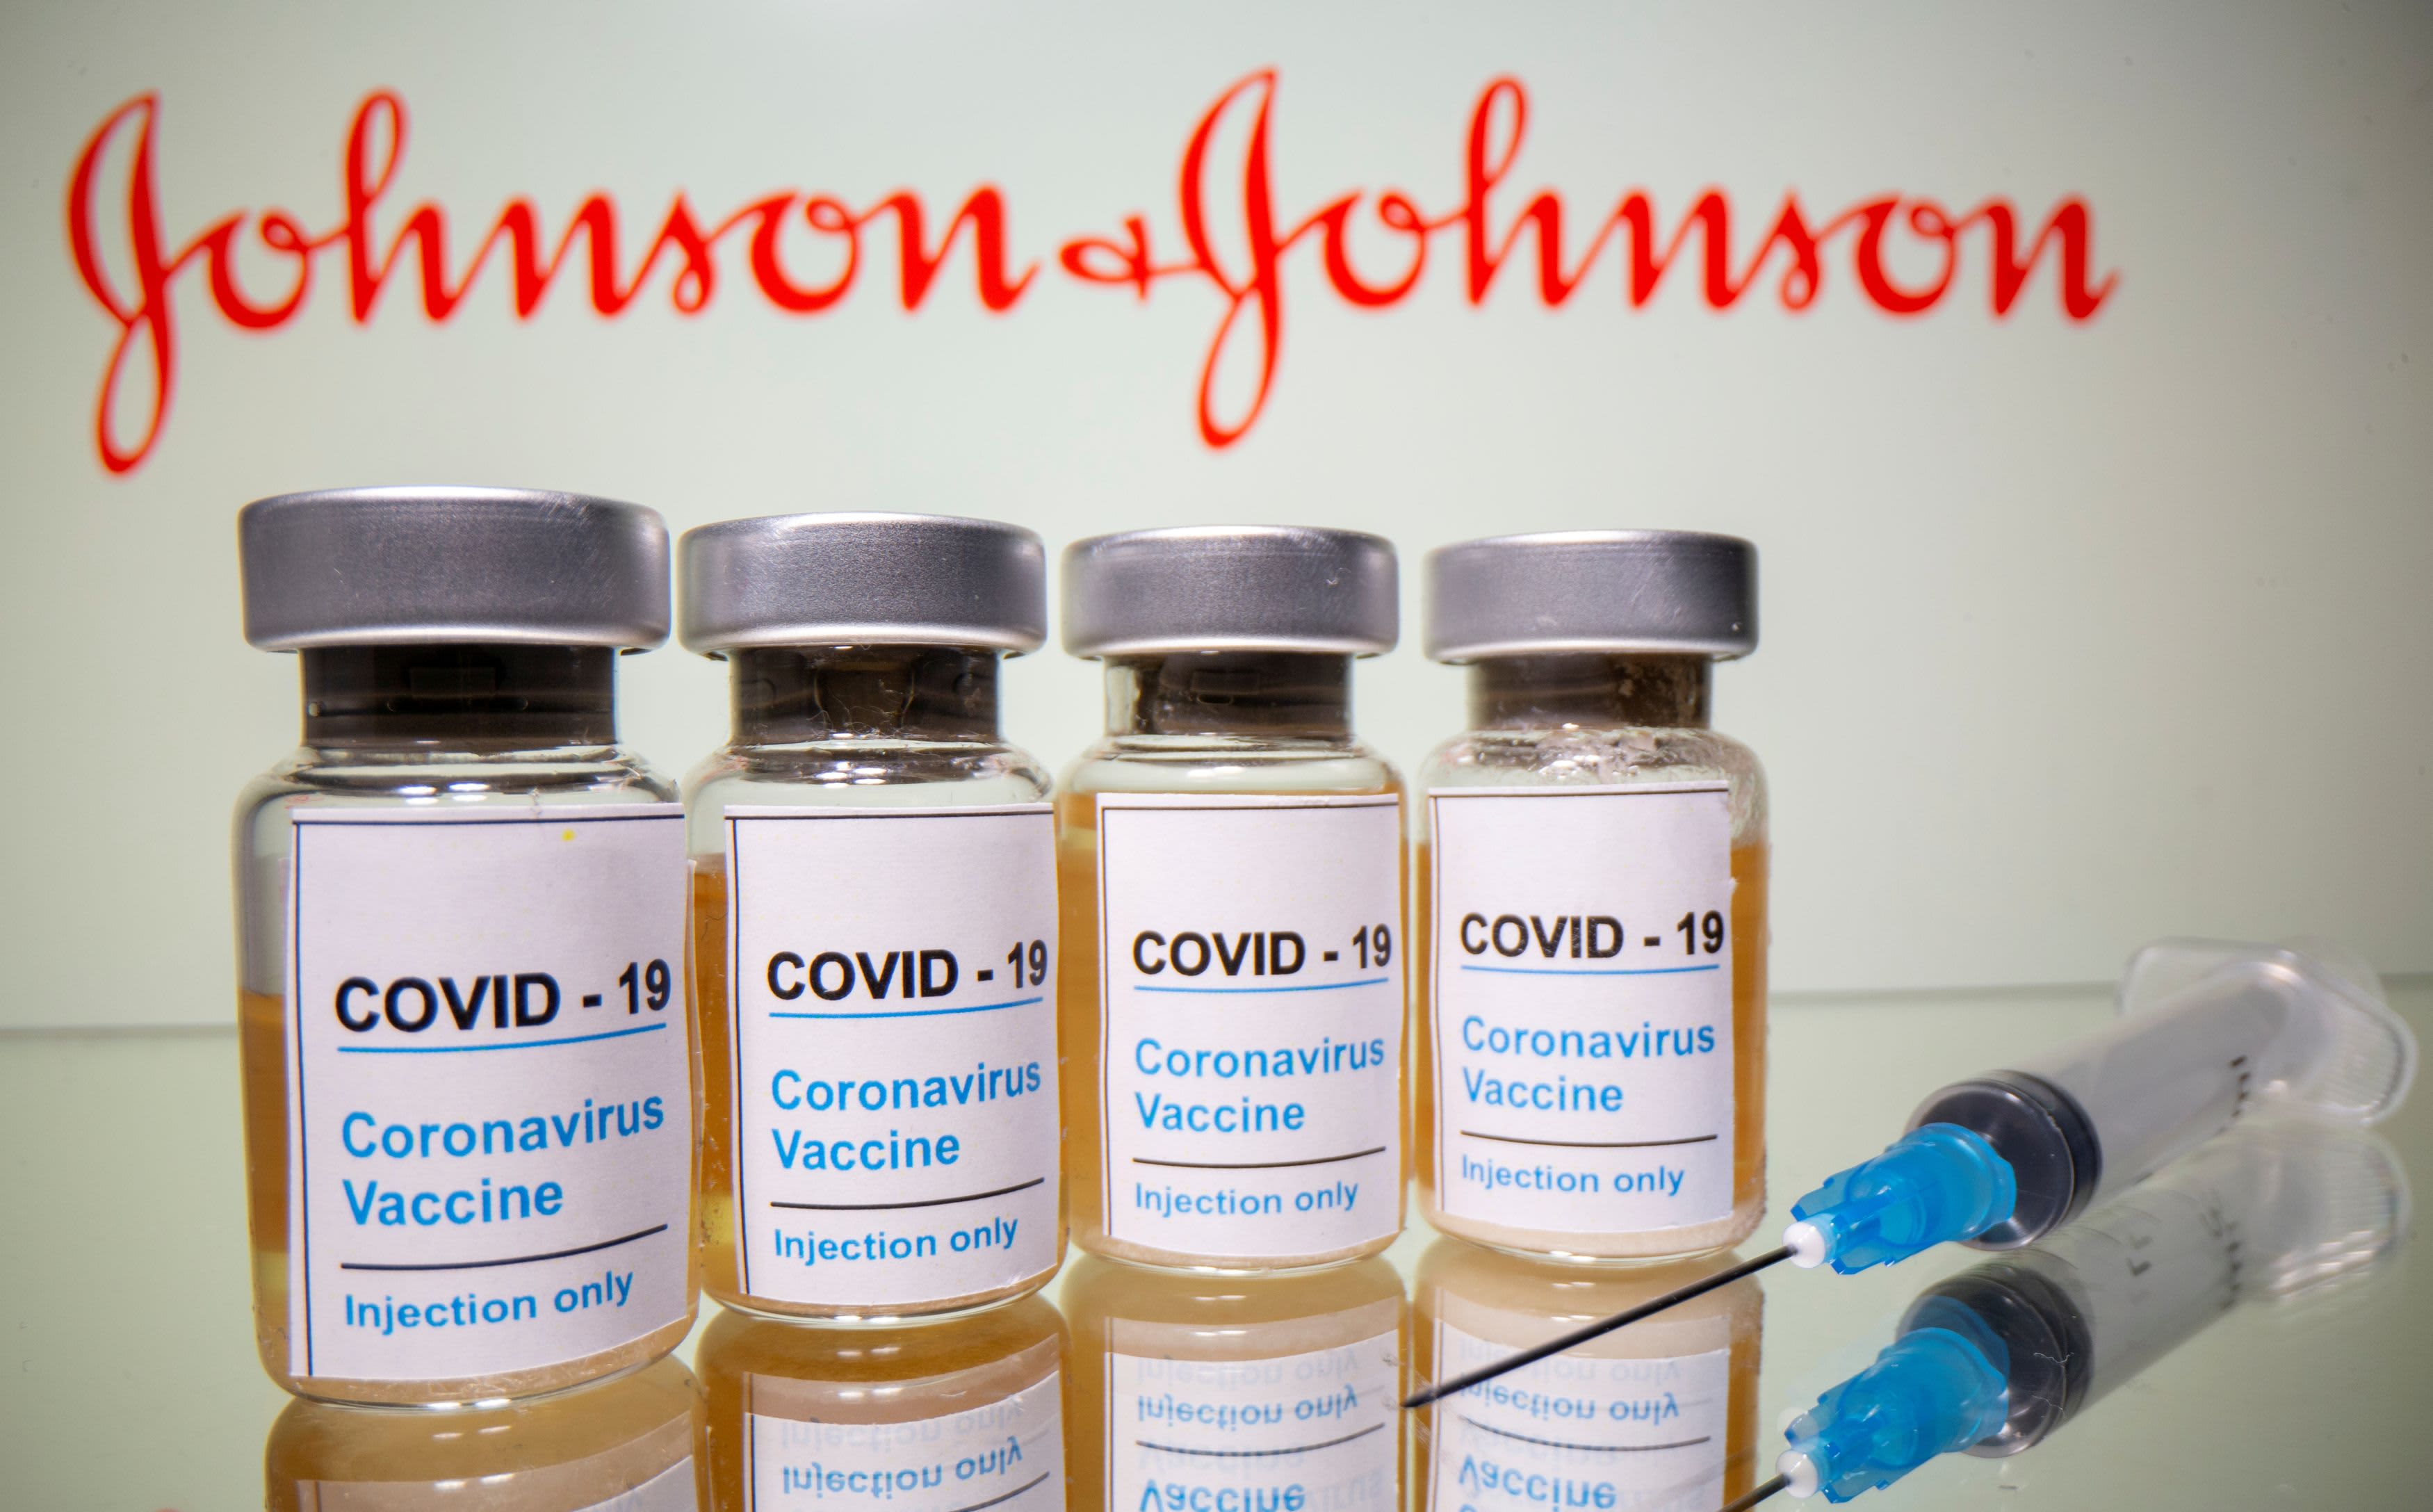 The CDC panel recommends the use of J&J’s Covid single dose vaccine